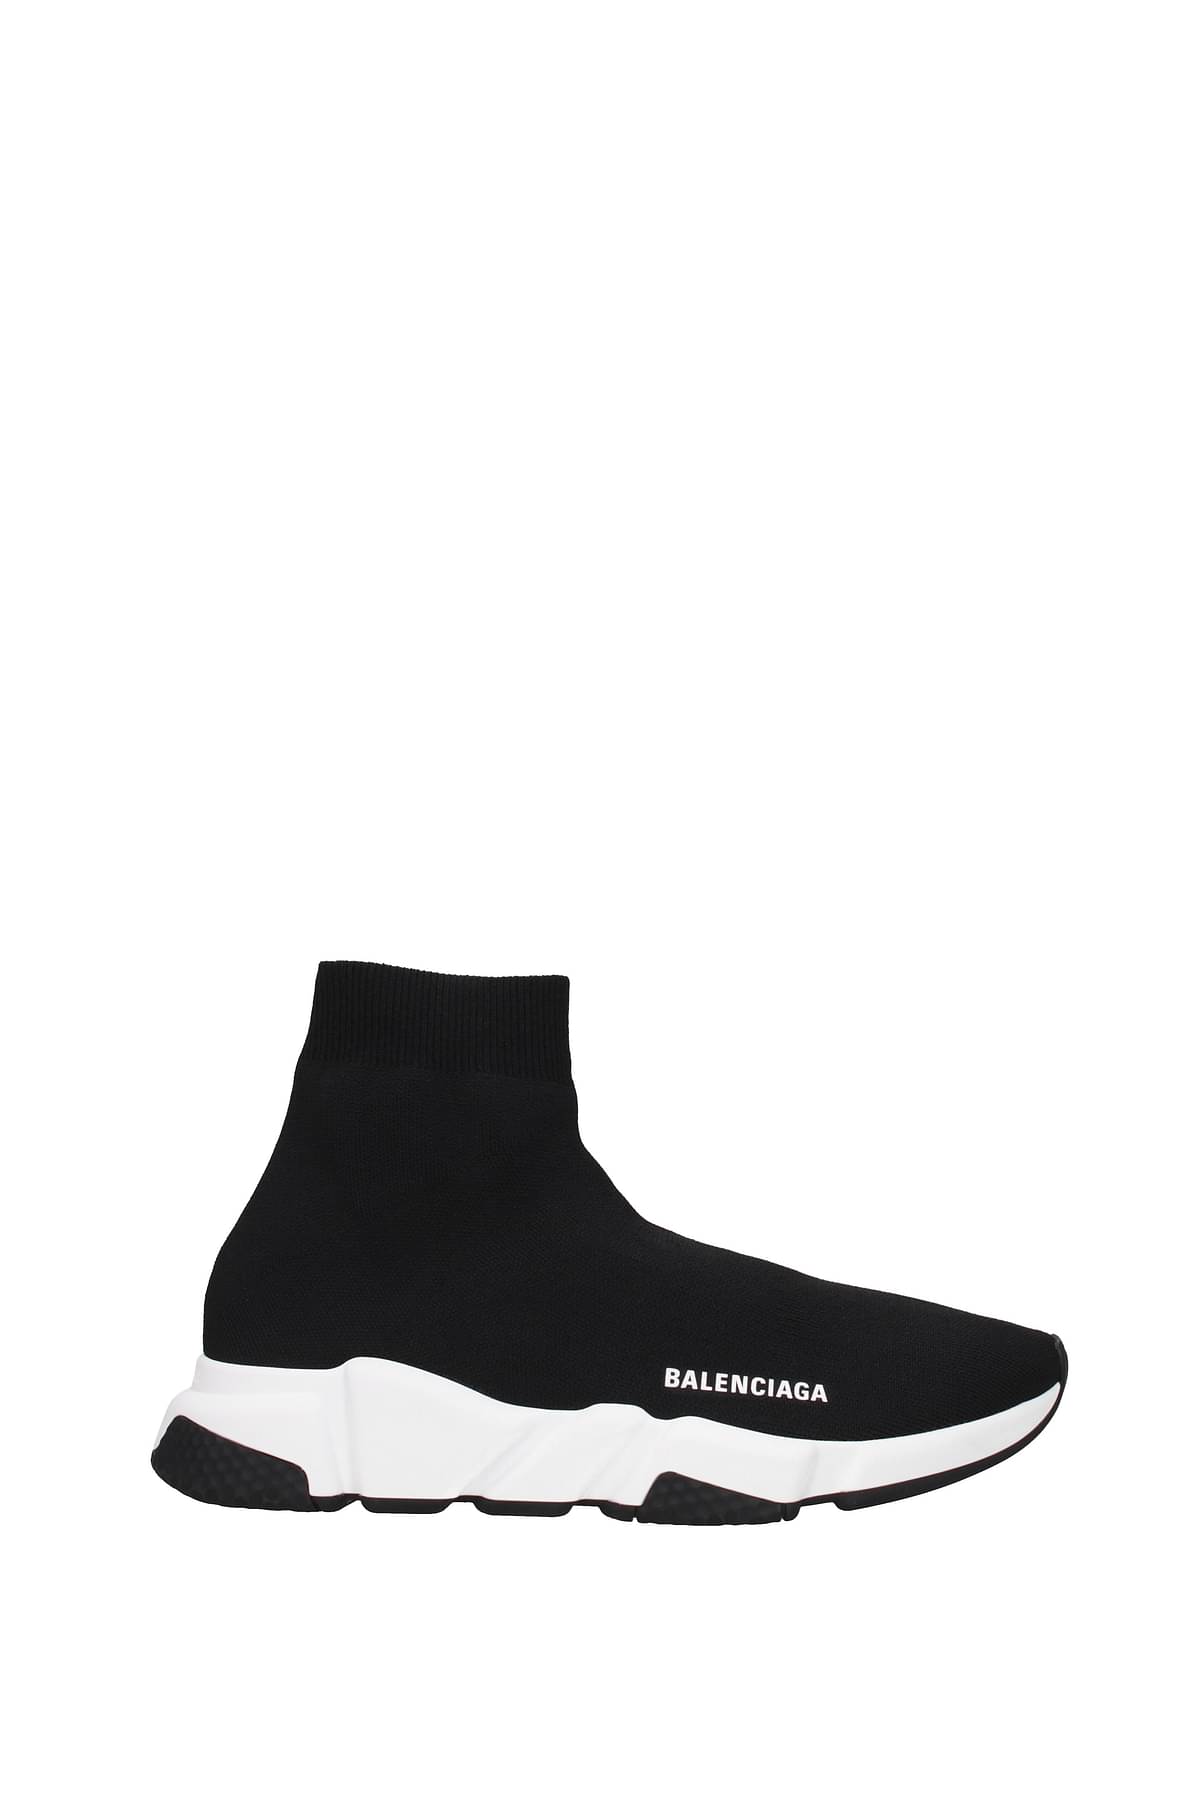 Size+9+-+Balenciaga+Speed+Trainer+Mid+Black+Red+2017 for sale online